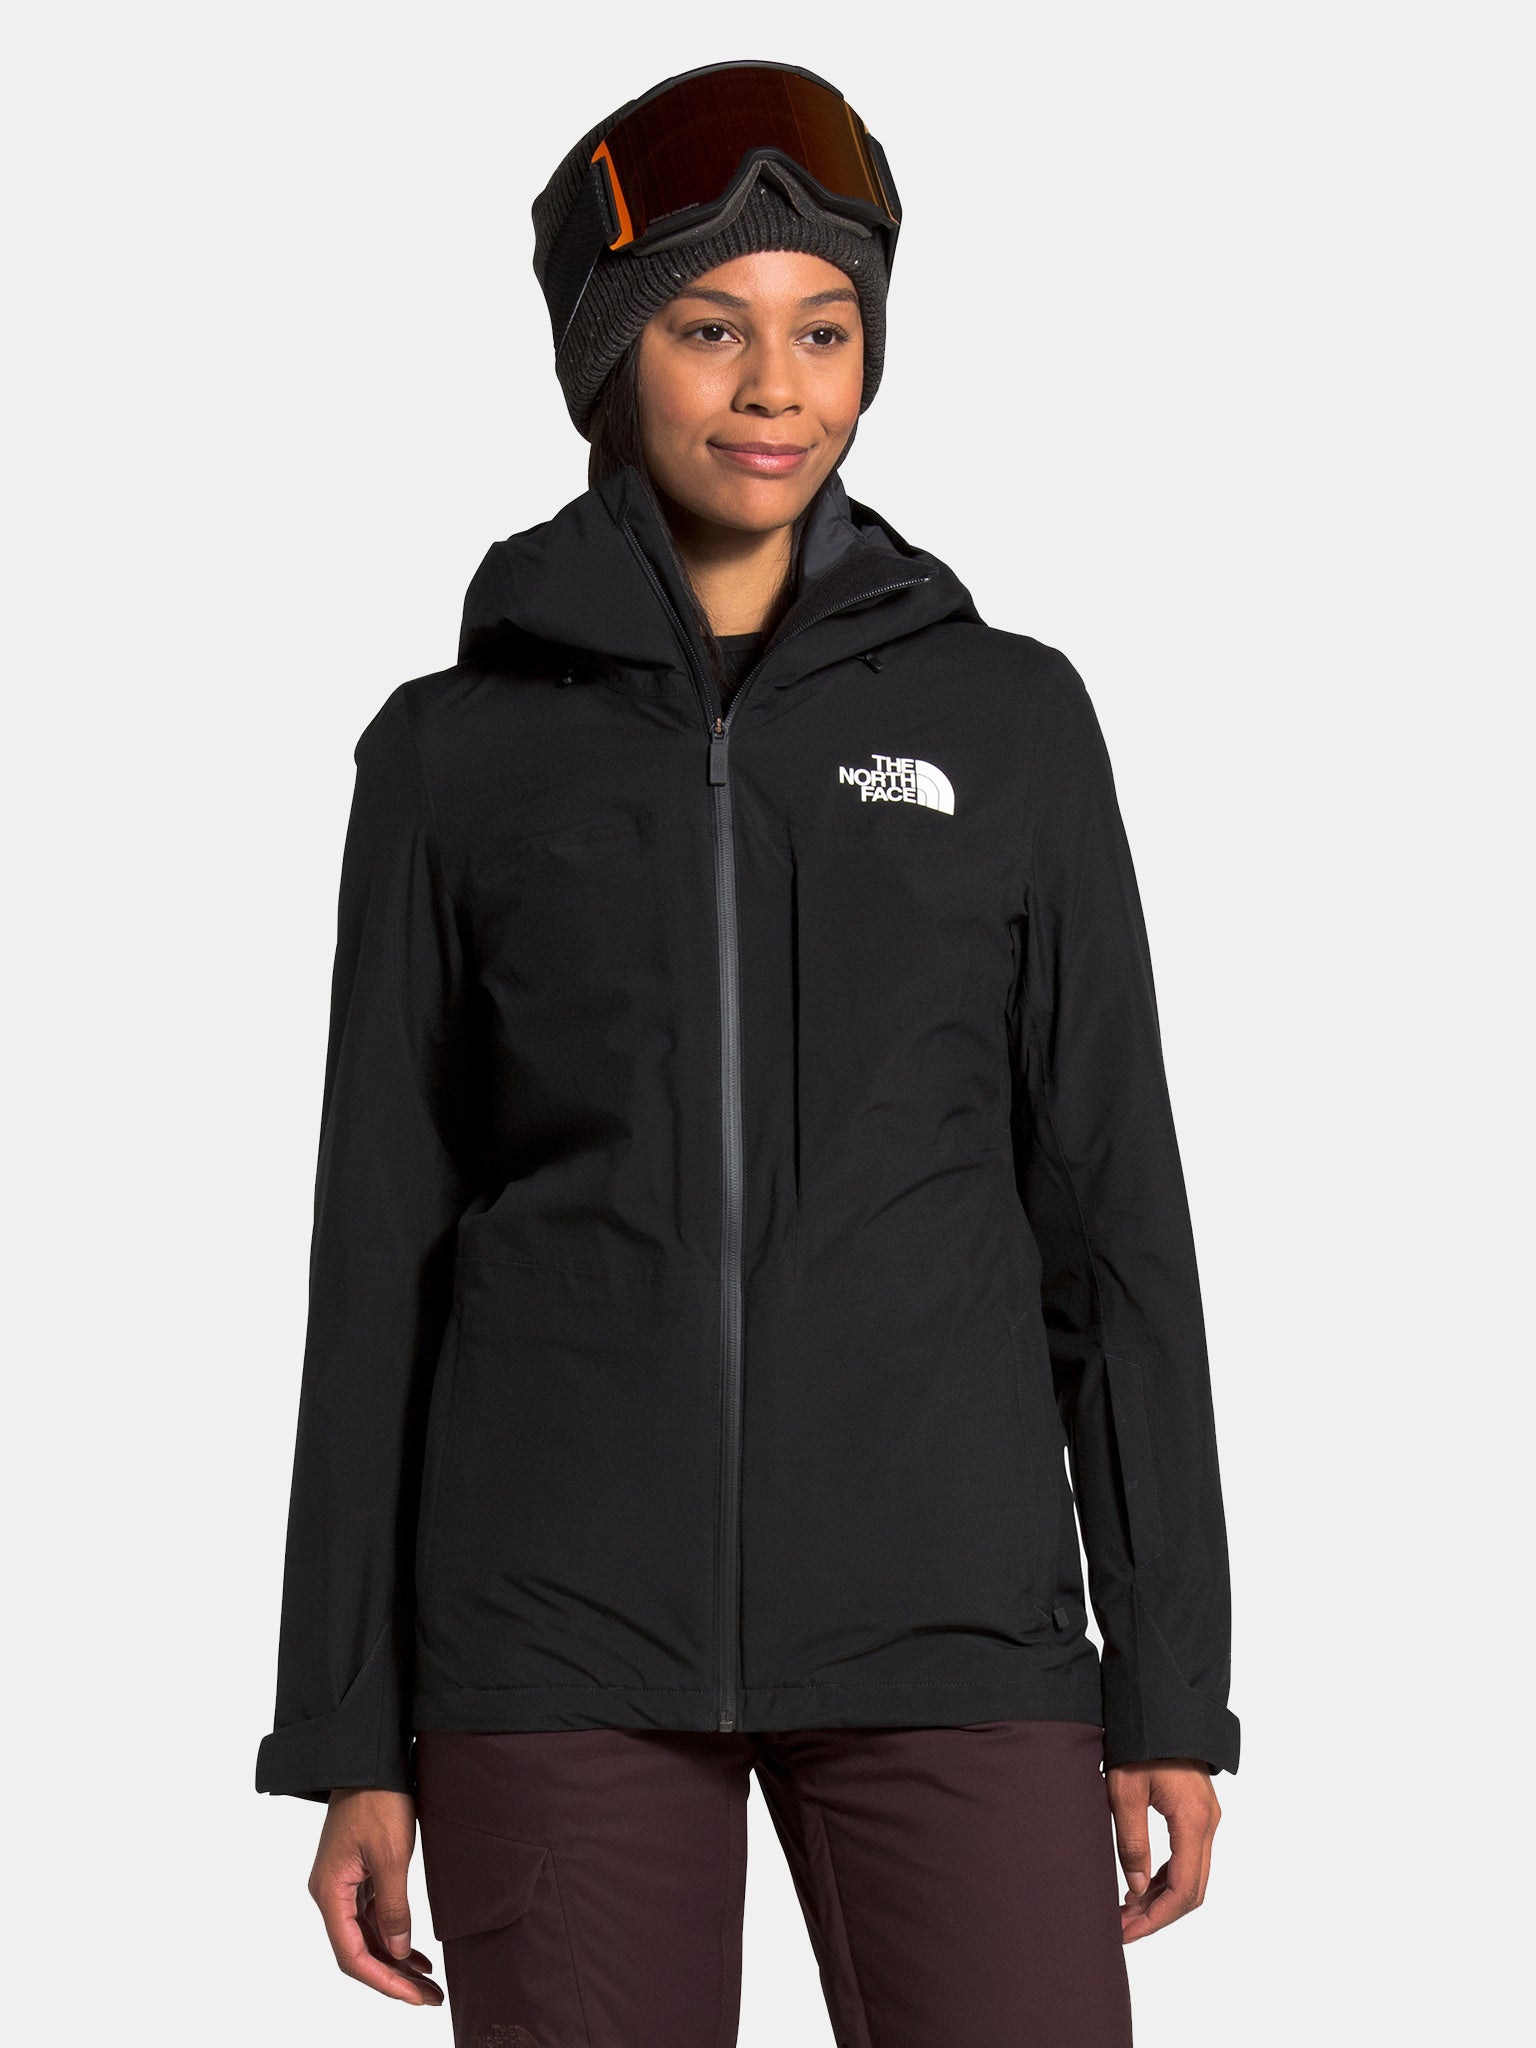 north face women's thermoball snow triclimate jacket